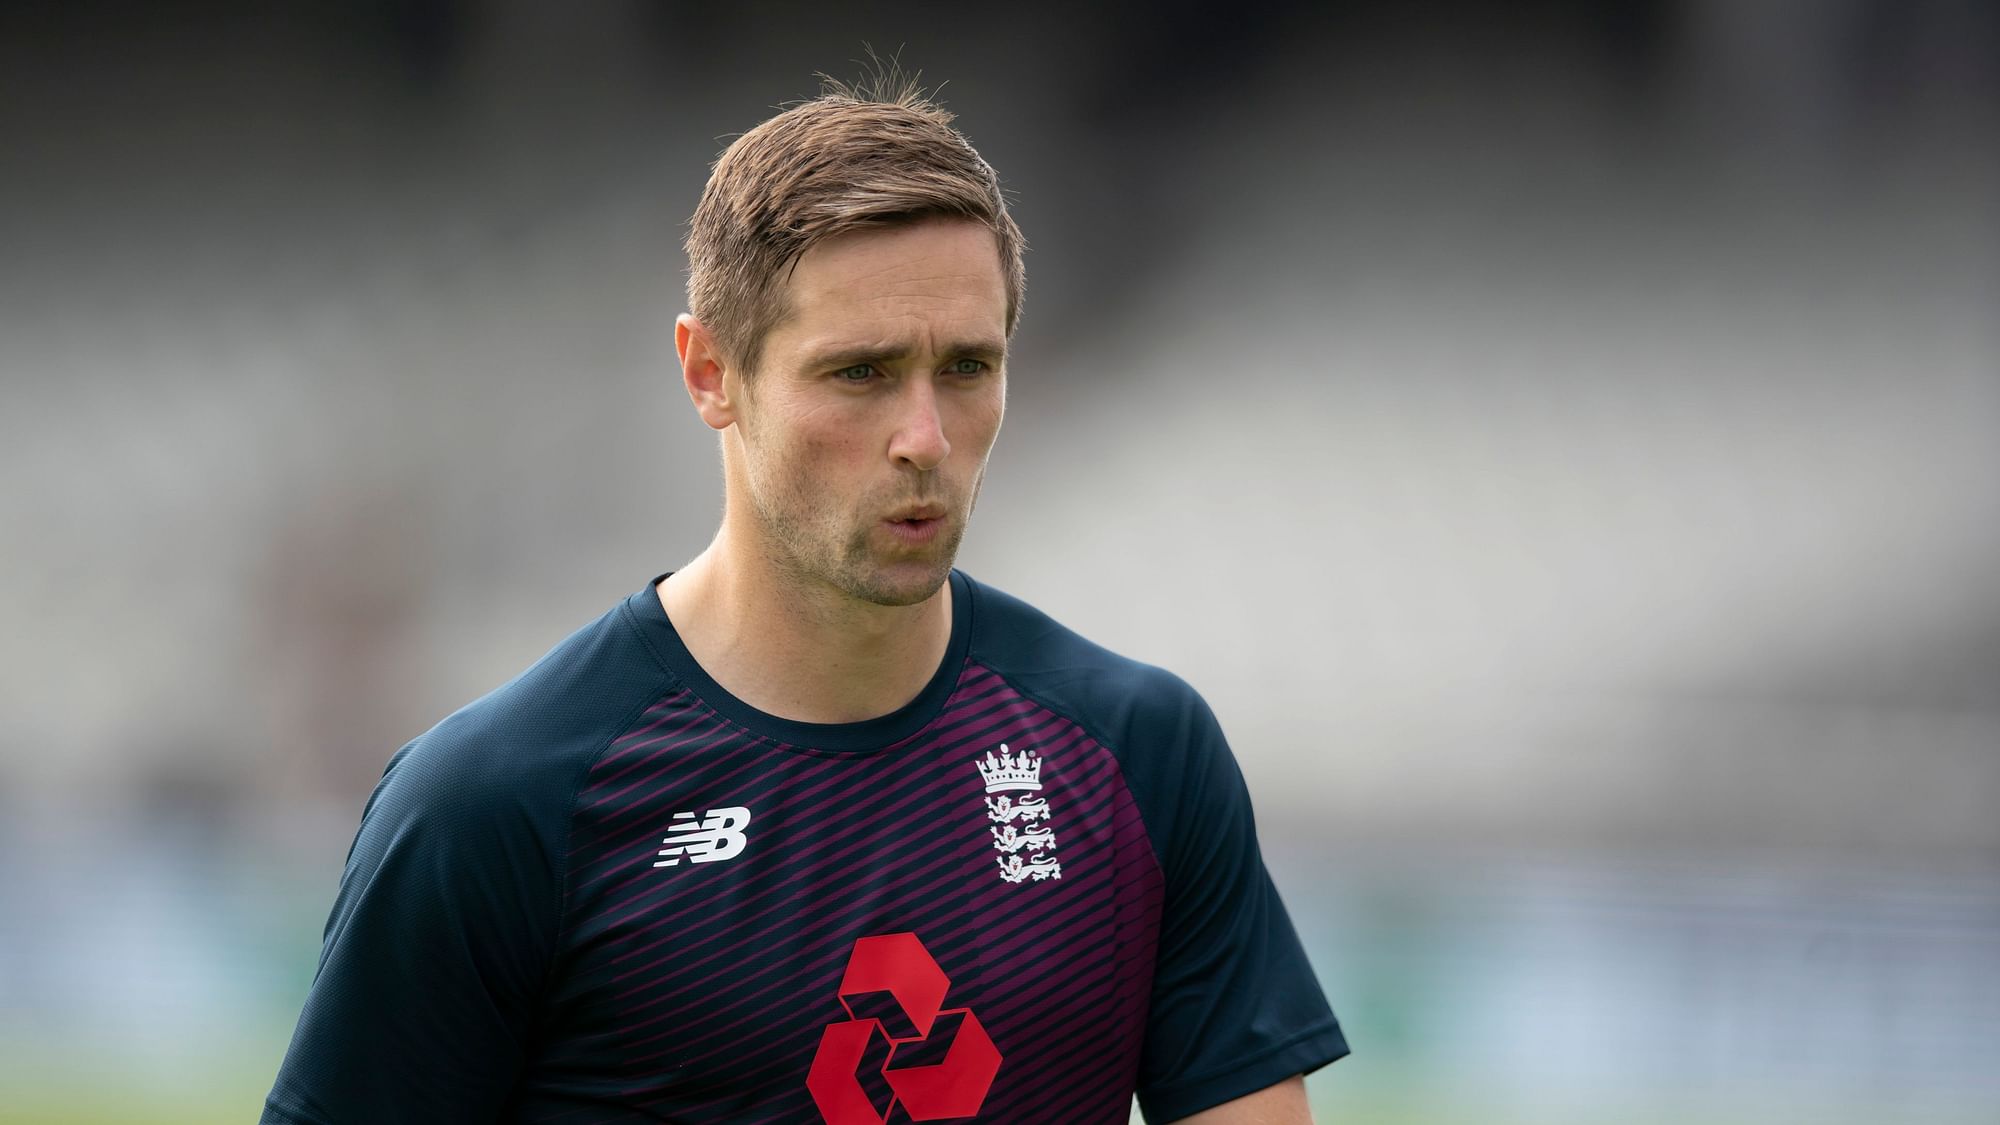 England all-rounder Chris Woakes has pulled out of this season’s Indian Premier League.